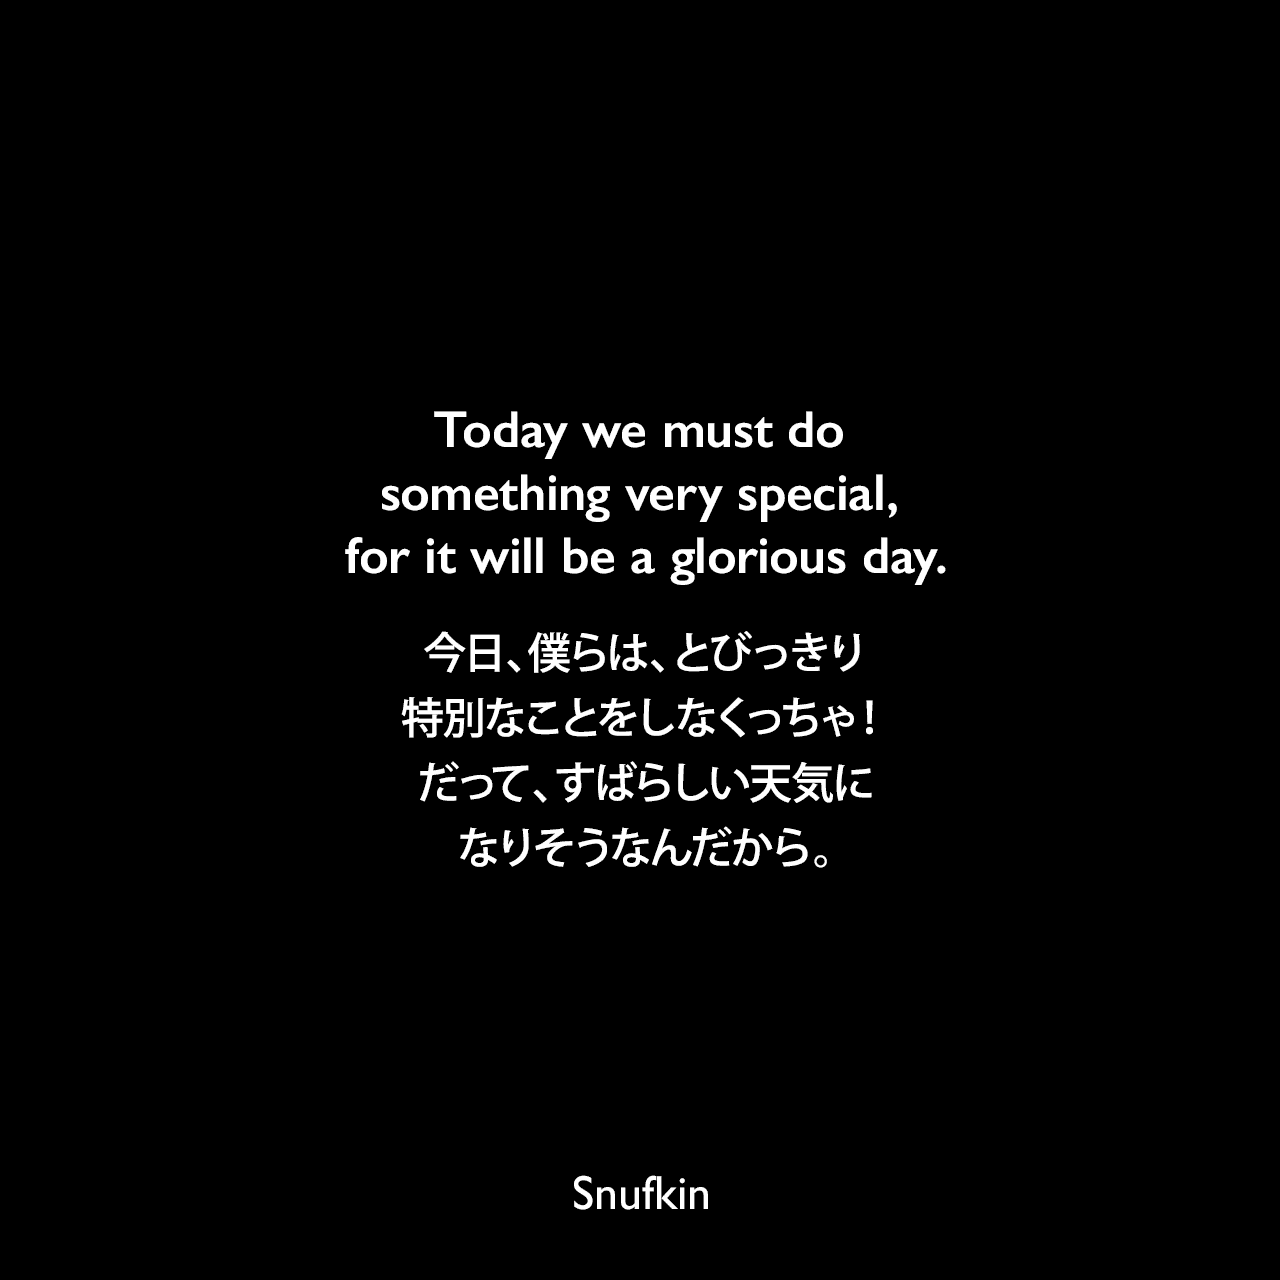 Today we must do something very special, for it will be a glorious day.今日、僕らは、とびっきり特別なことをしなくっちゃ！だって、すばらしい天気になりそうなんだから。Snufkin